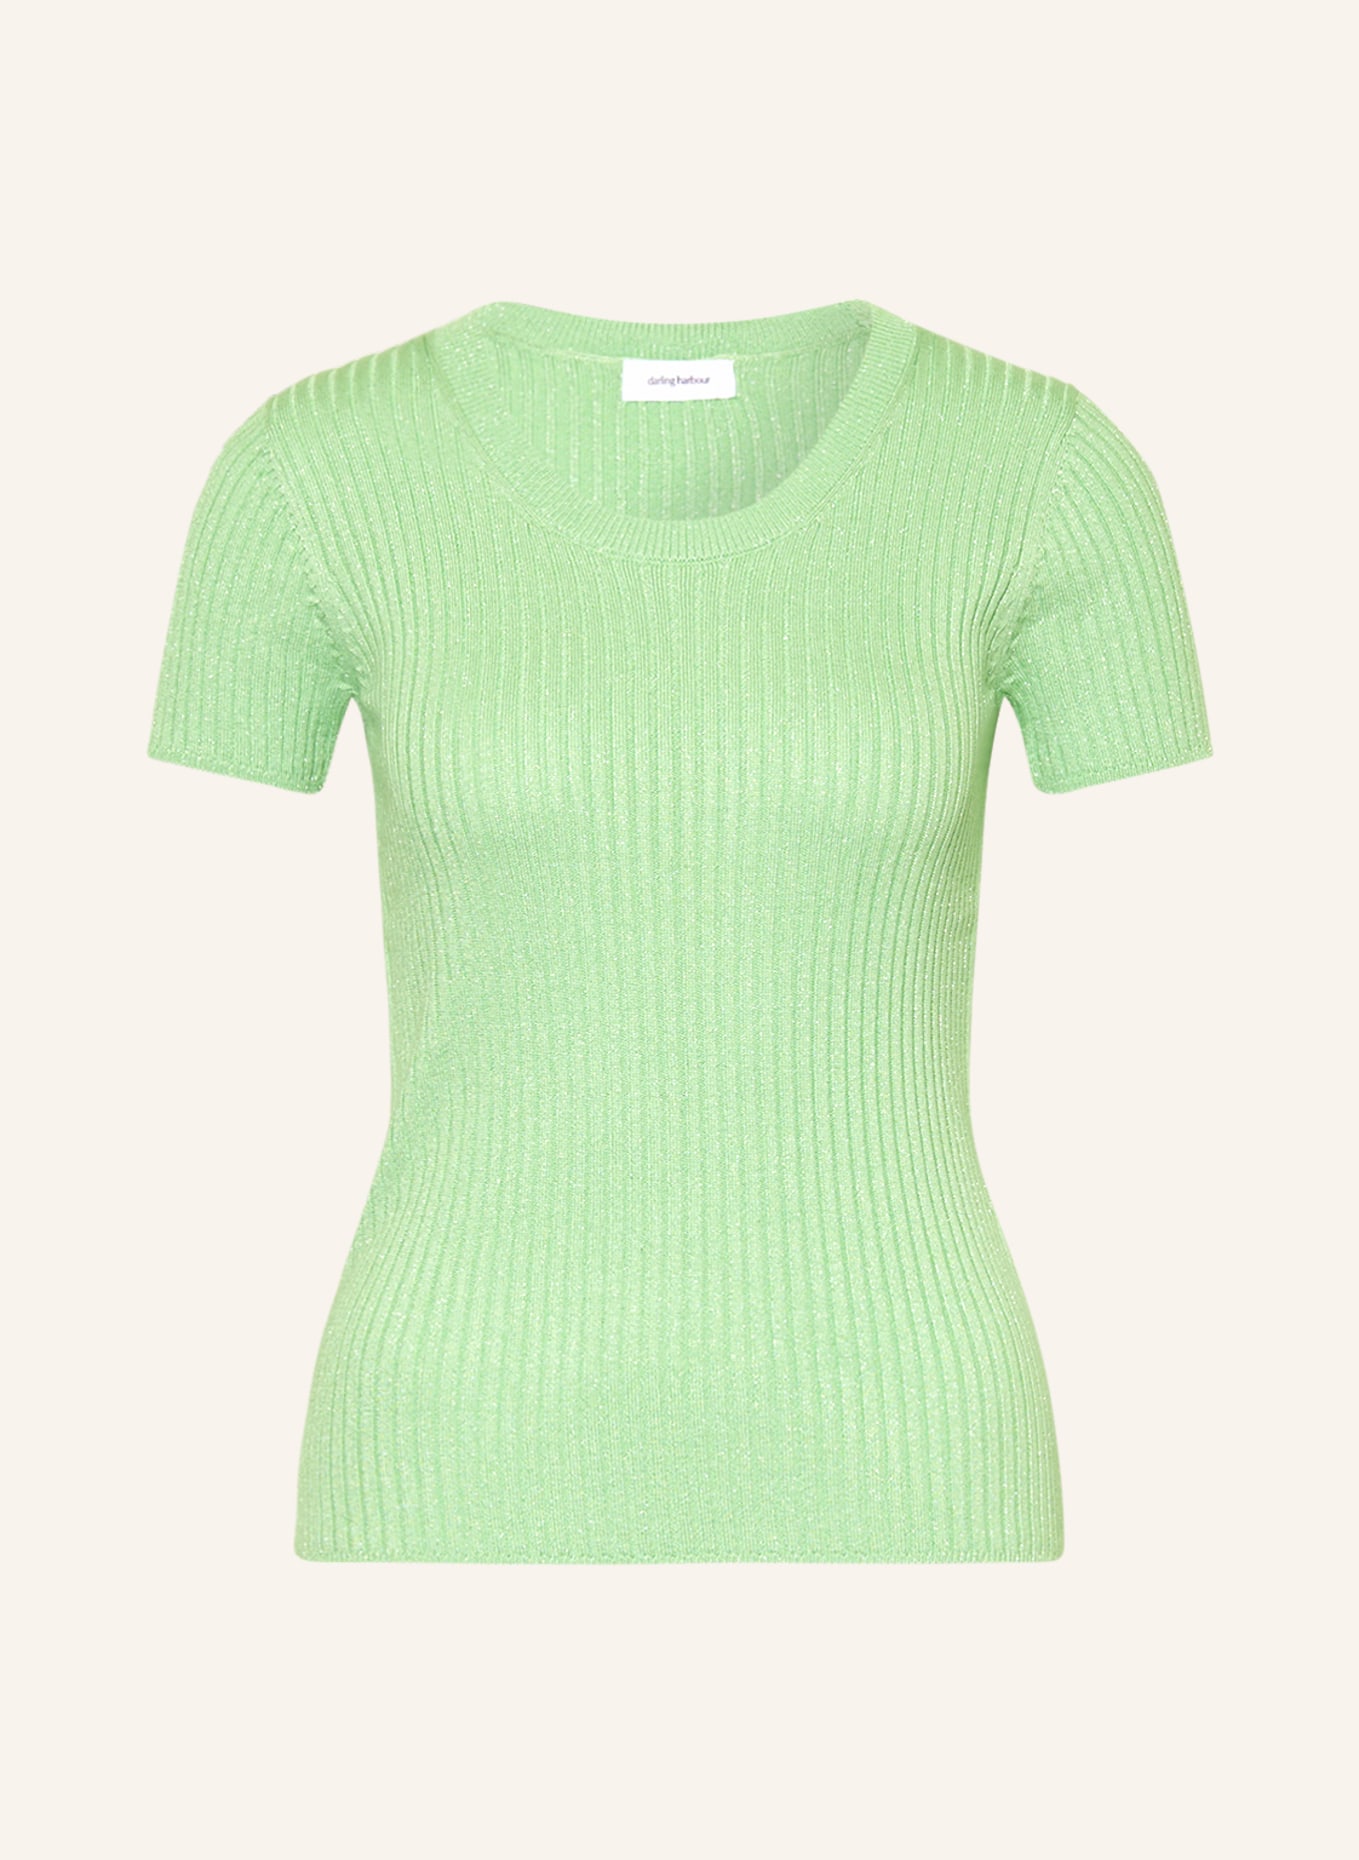 darling harbour Knit shirt with glitter thread, Color: NEON GREEN (Image 1)